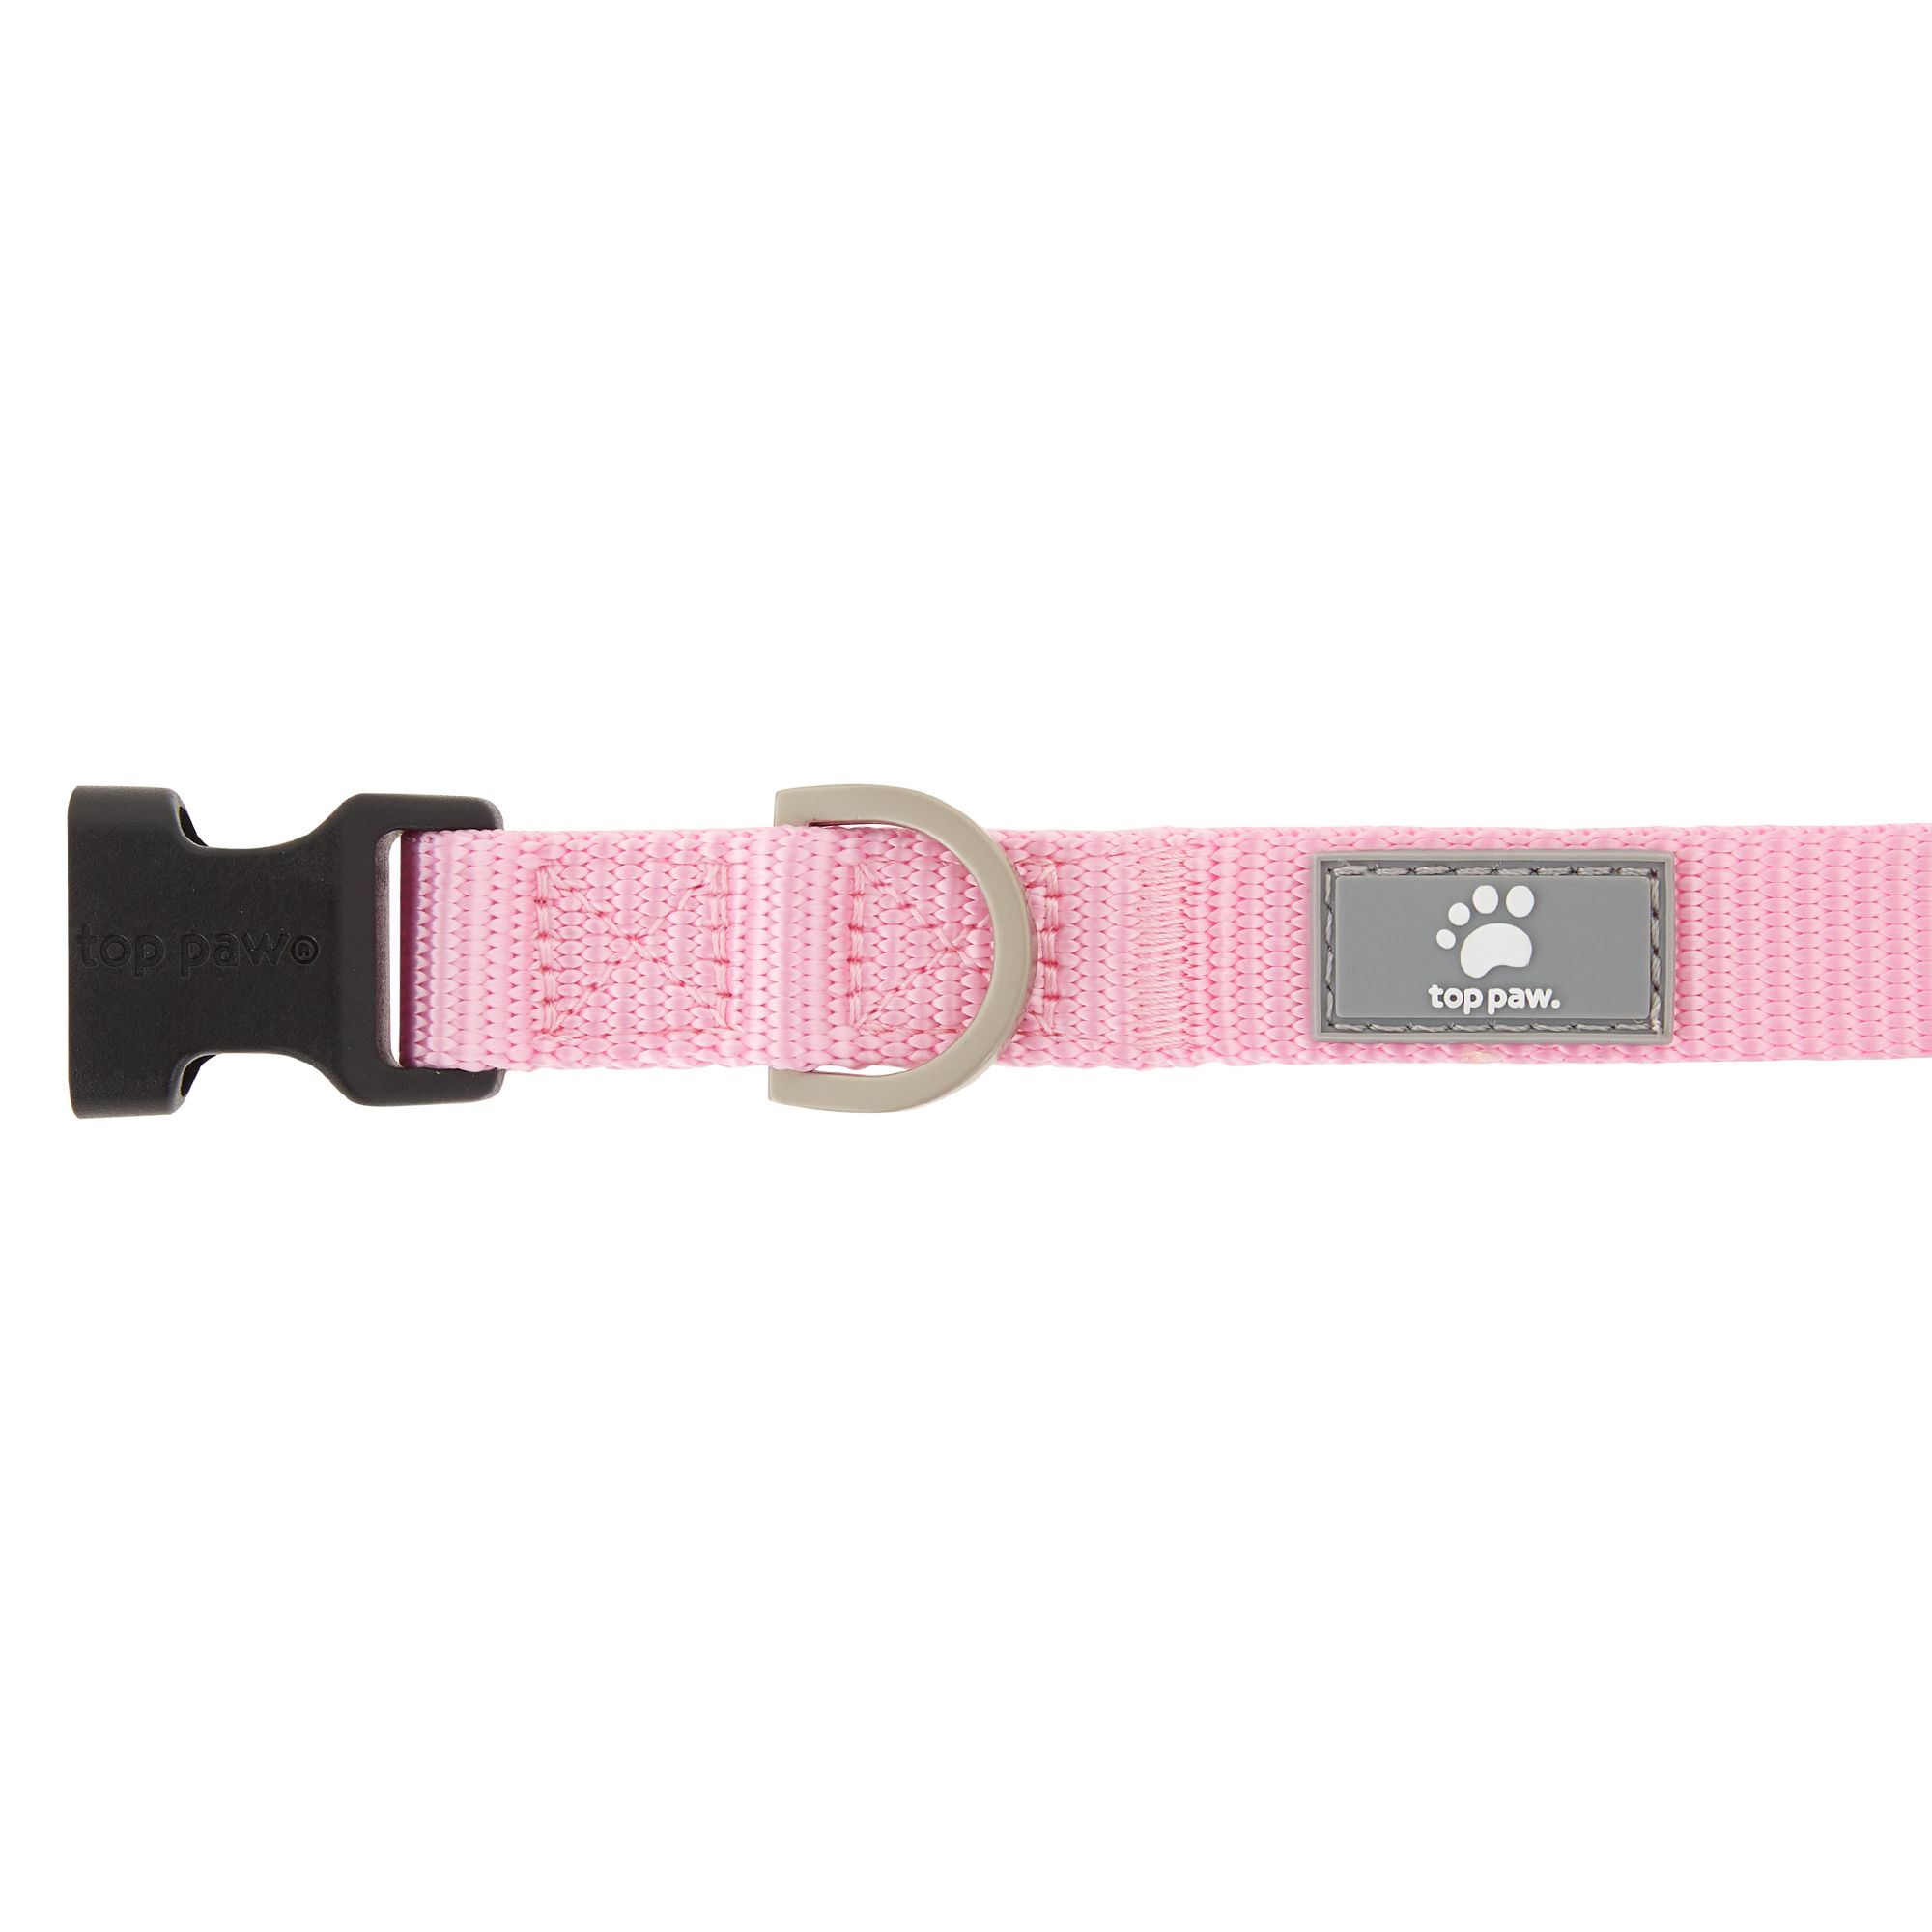 Top Paw Basic Chain Dog Collar, Size: 20 in | PetSmart